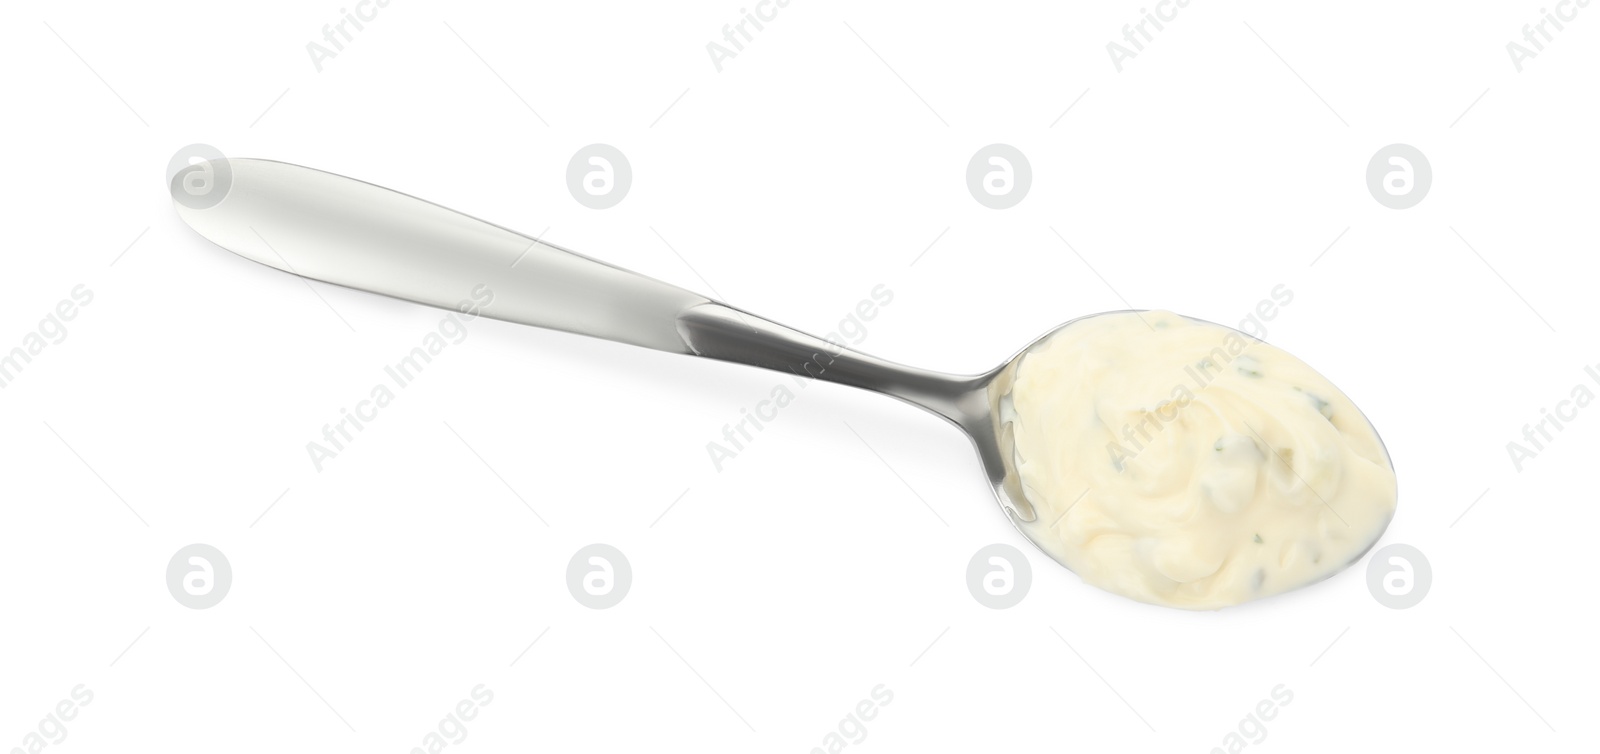 Photo of Tartar sauce in spoon isolated on white, top view